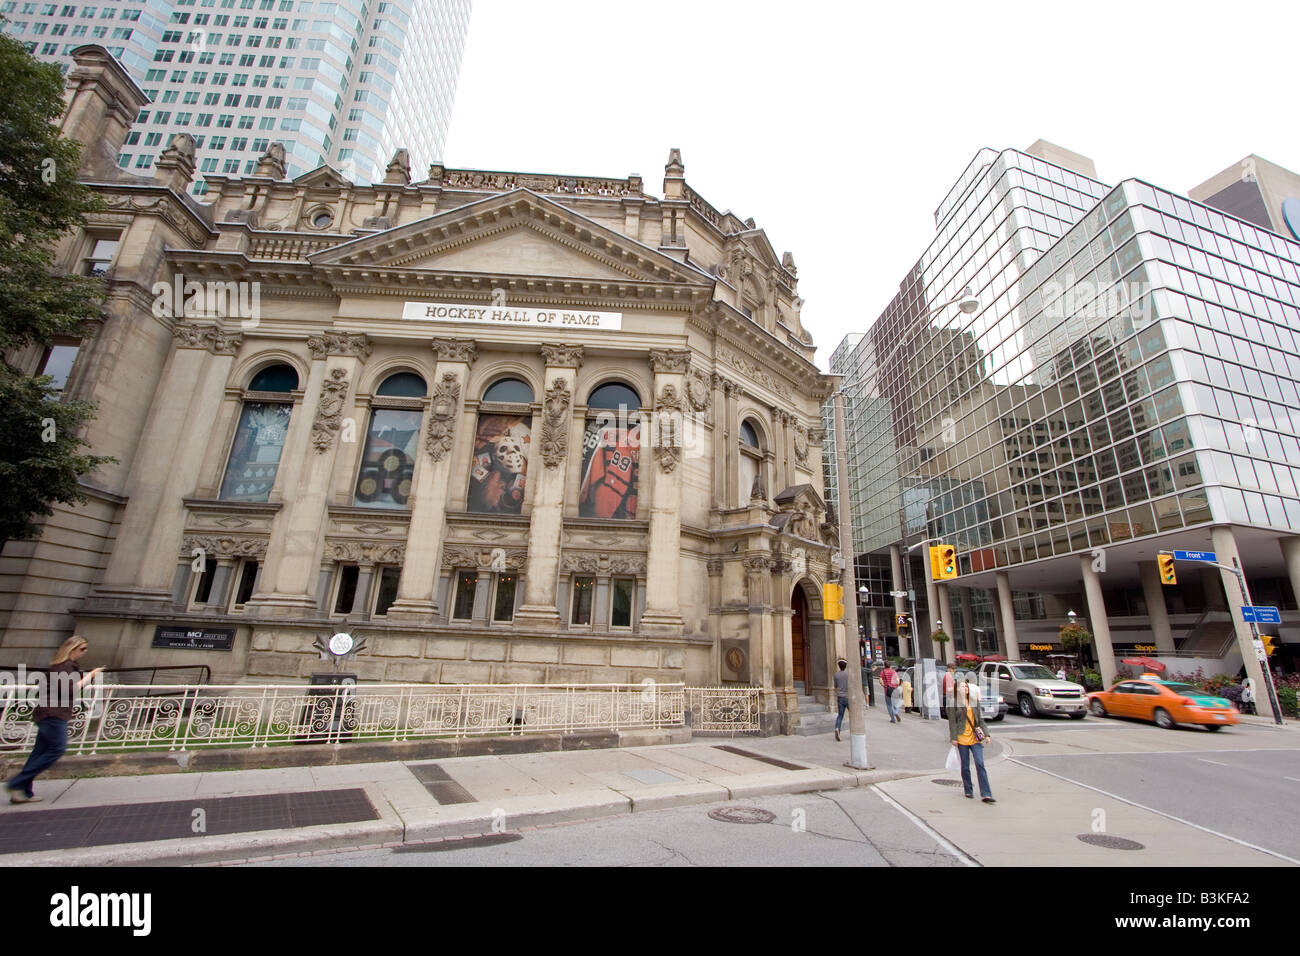 Hockey Hall of Fame. Toronto. In Canada. Foto Stock